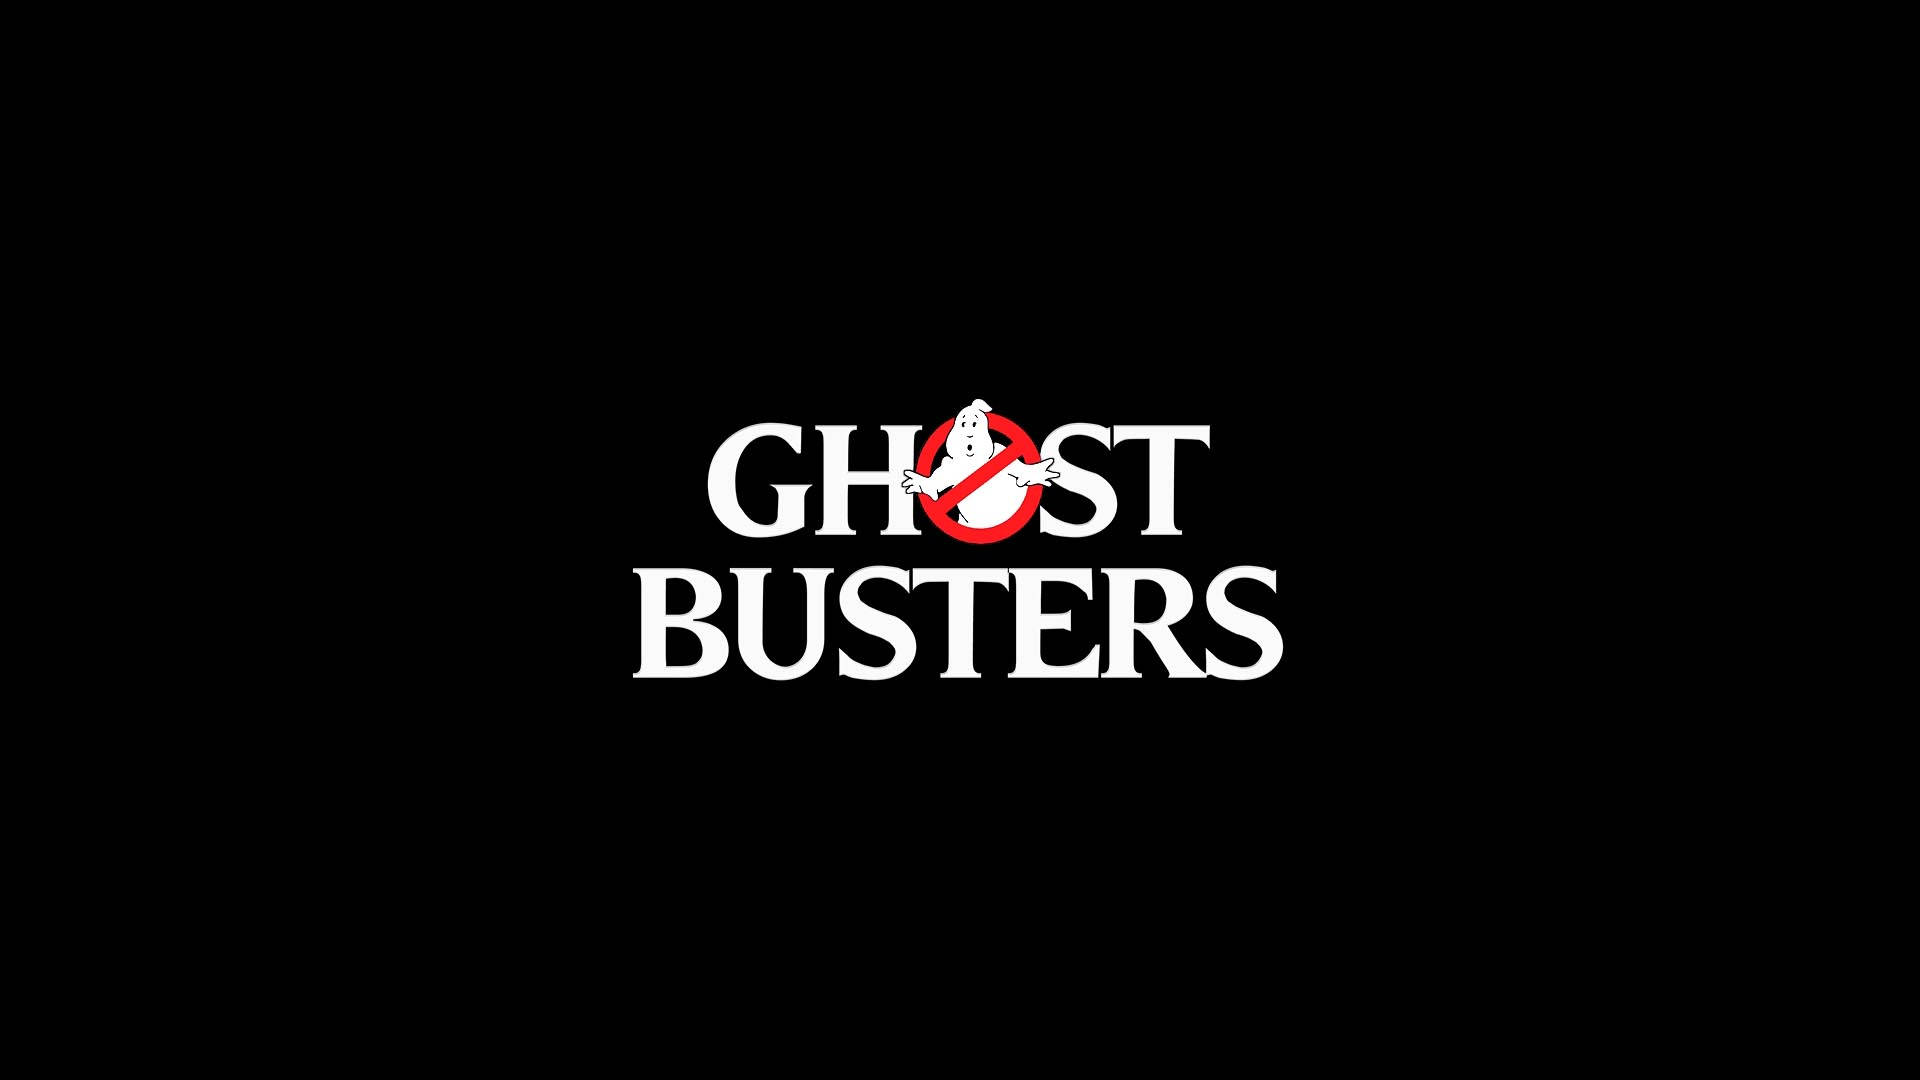 Stay Puft Marshmallow Man Joins The Ghostbusters Background